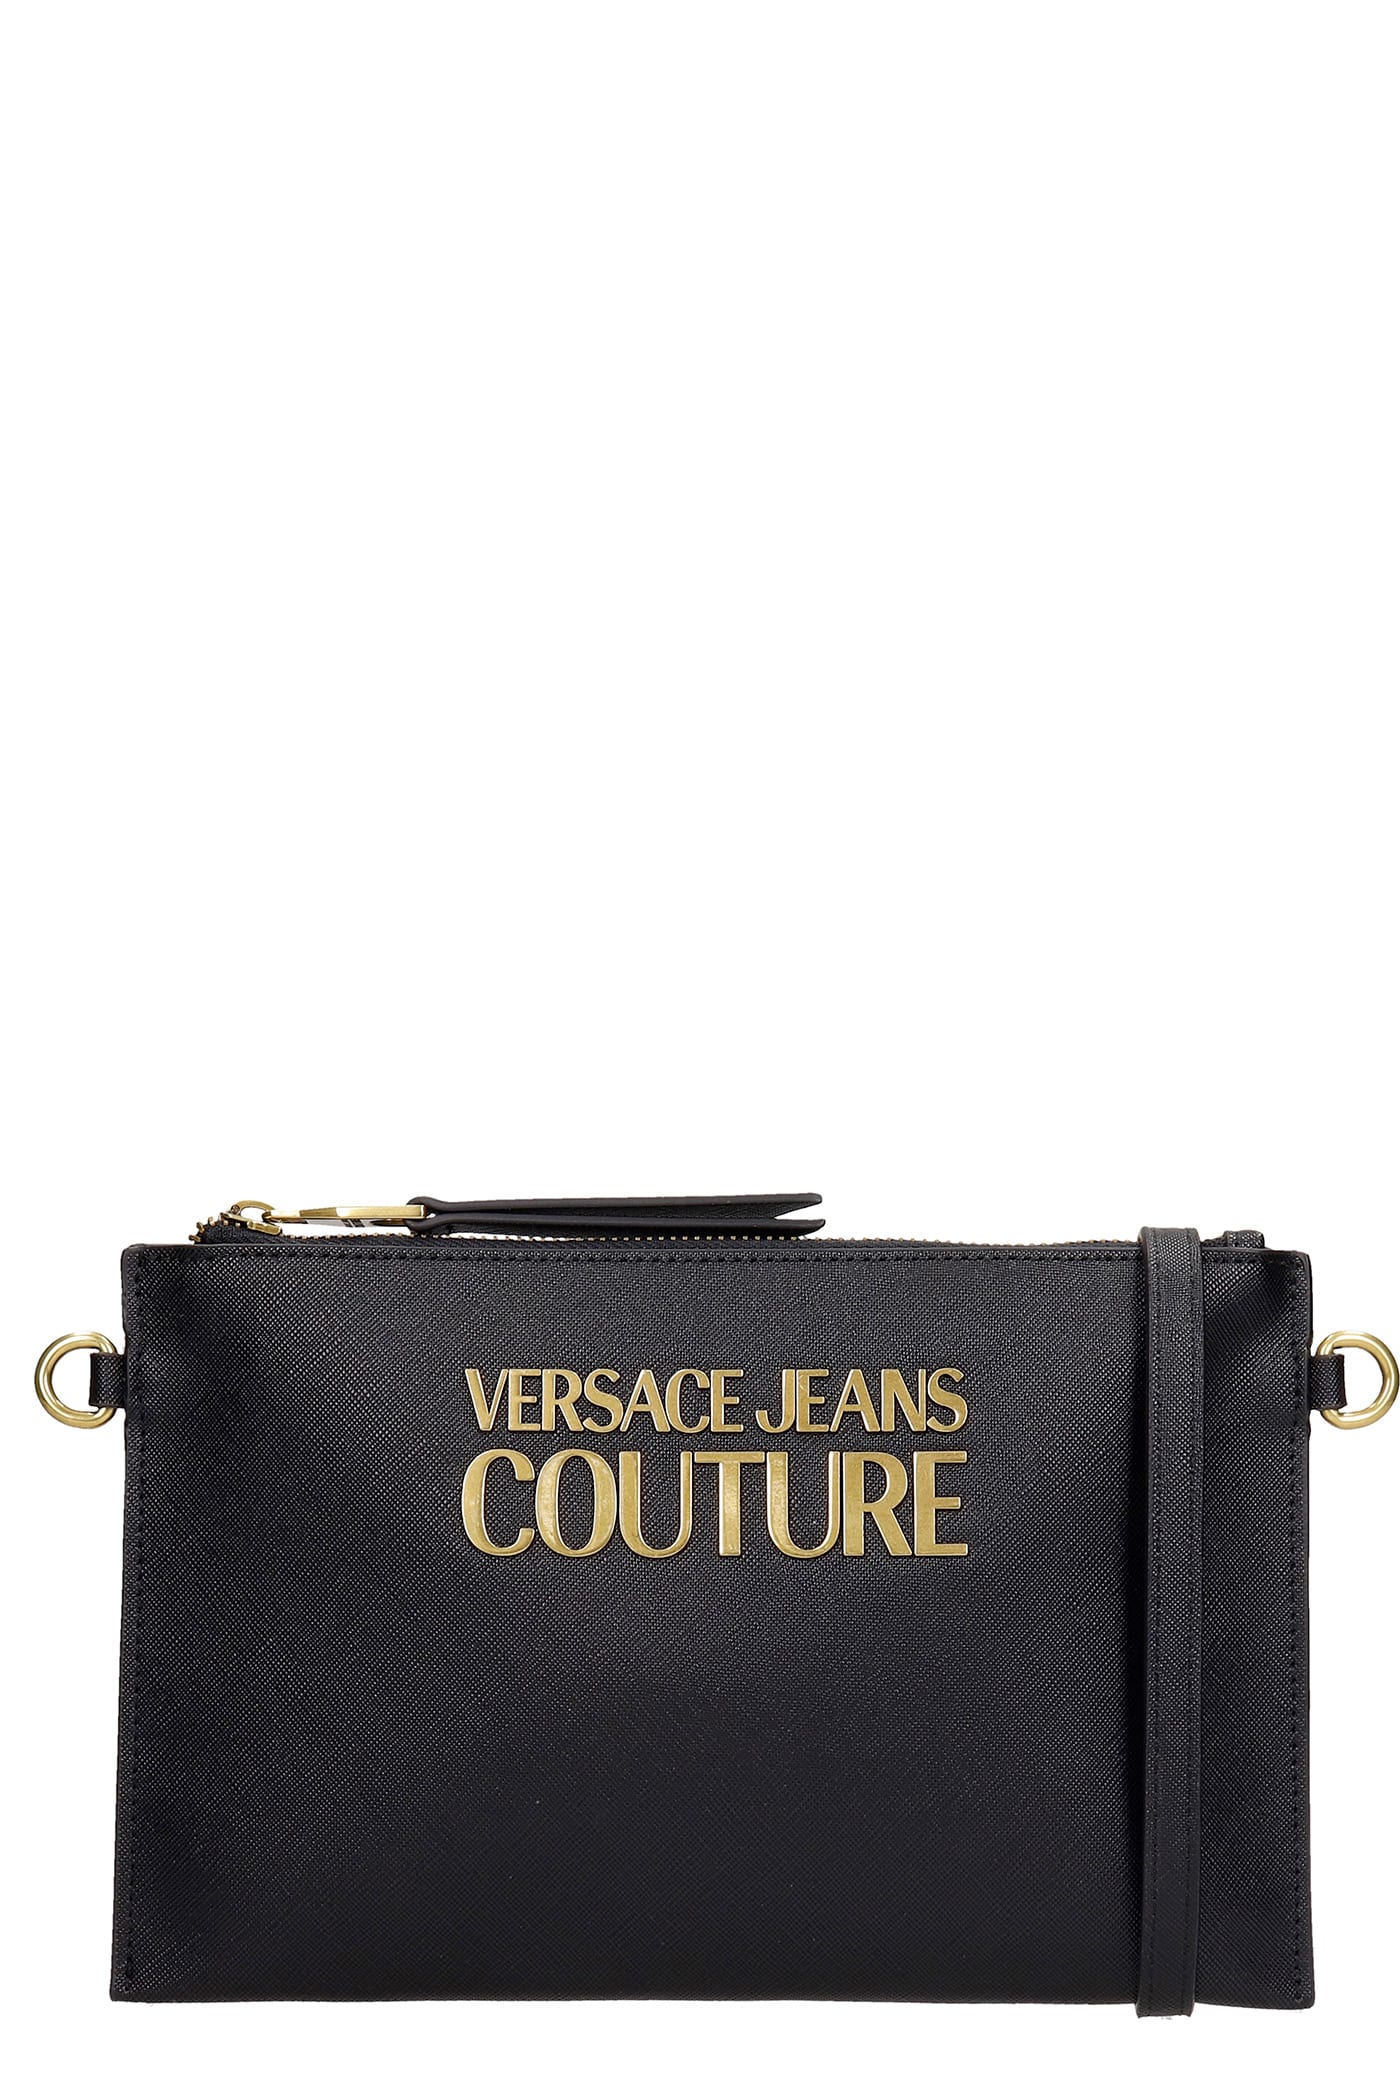 Versace Jeans Couture Clutches CLUTCH IN BLACK FAUX LEATHER